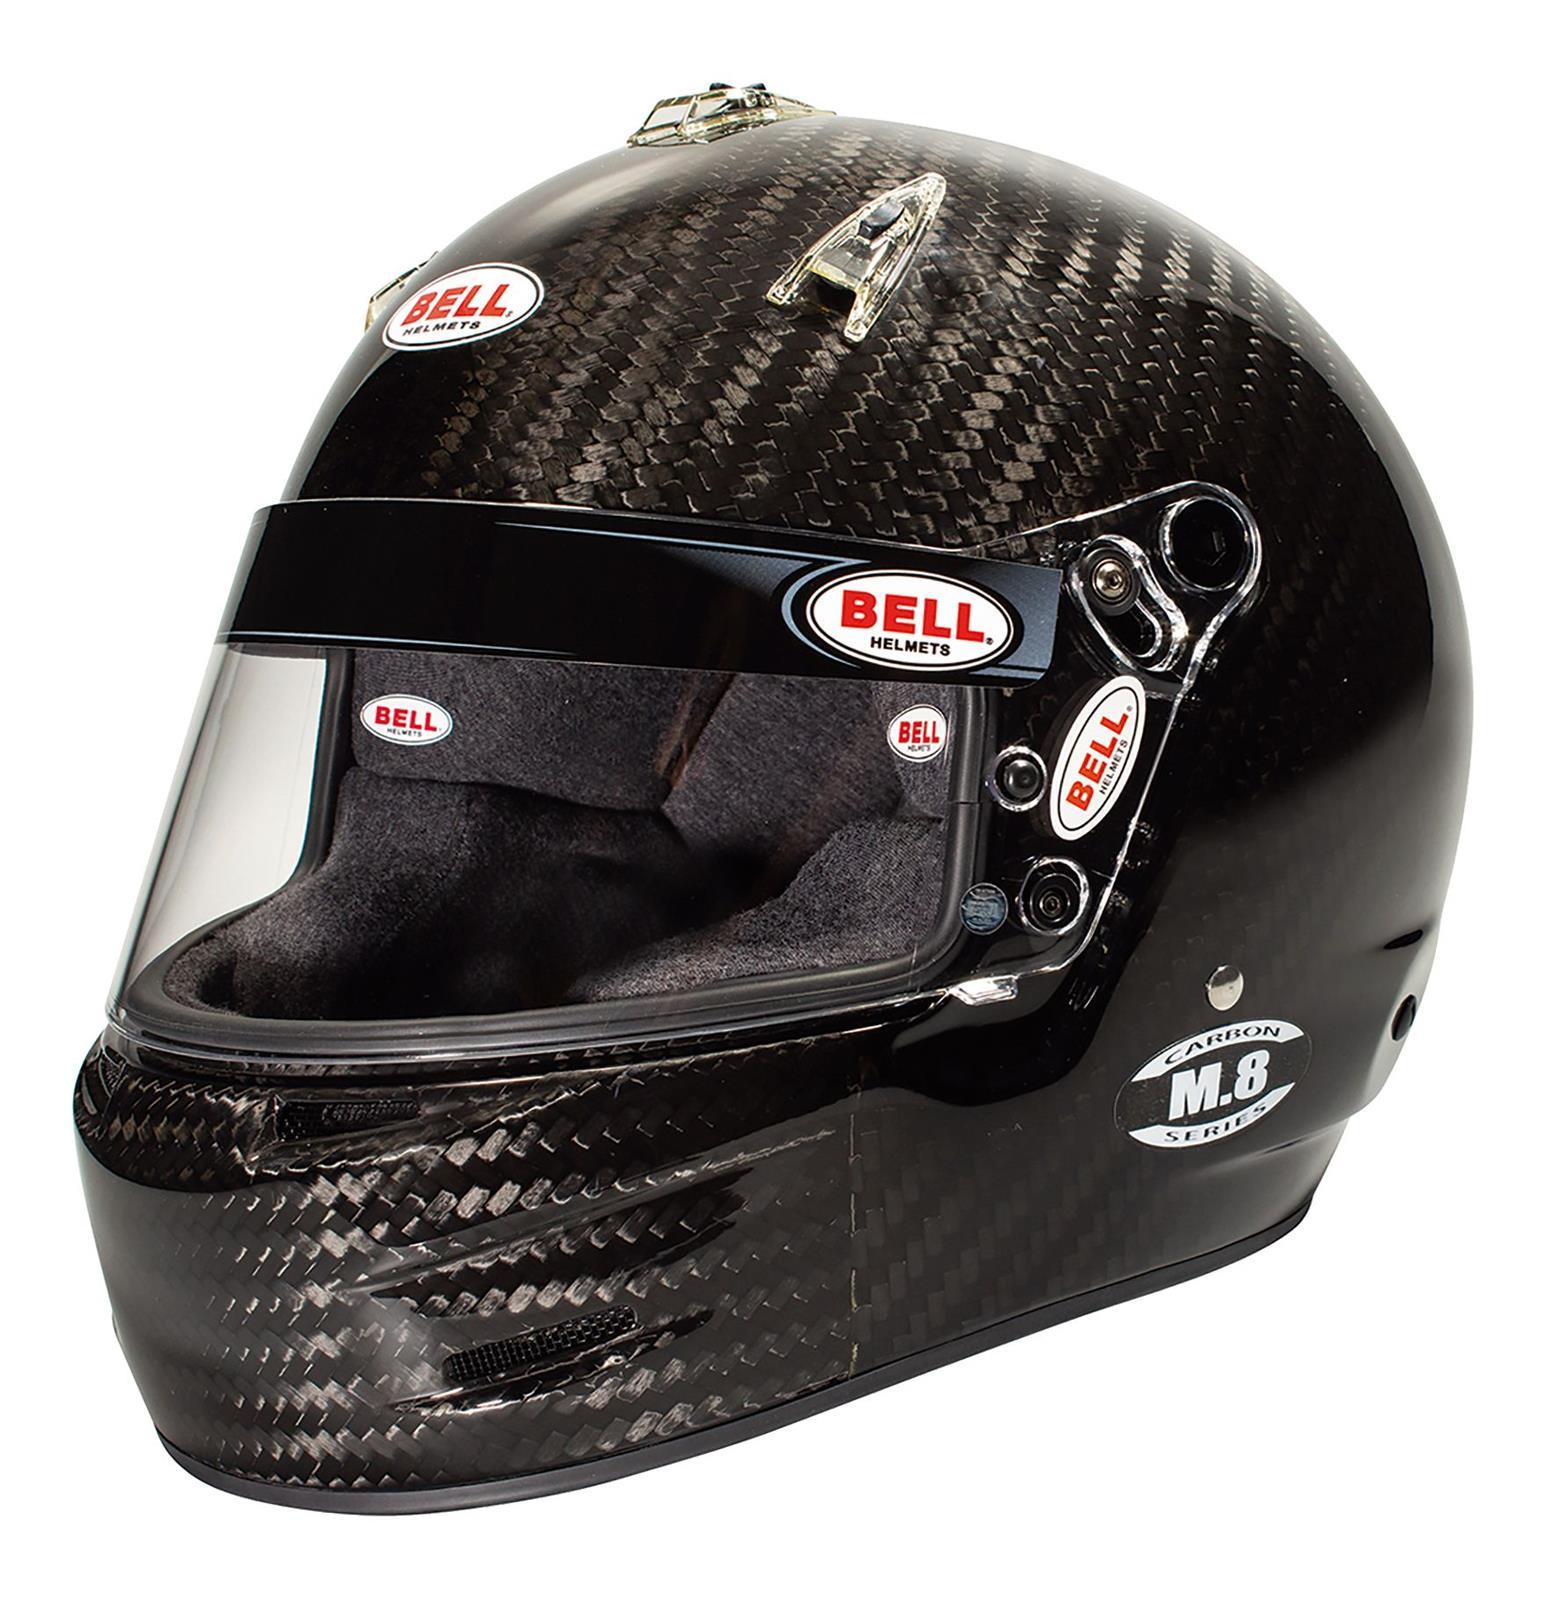 Bell Helmets 1208A03 Helmet, M8, Snell SA2020, FIA Approved, Head and Neck Support Ready, Carbon Fiber, Size 7-1/4, Each